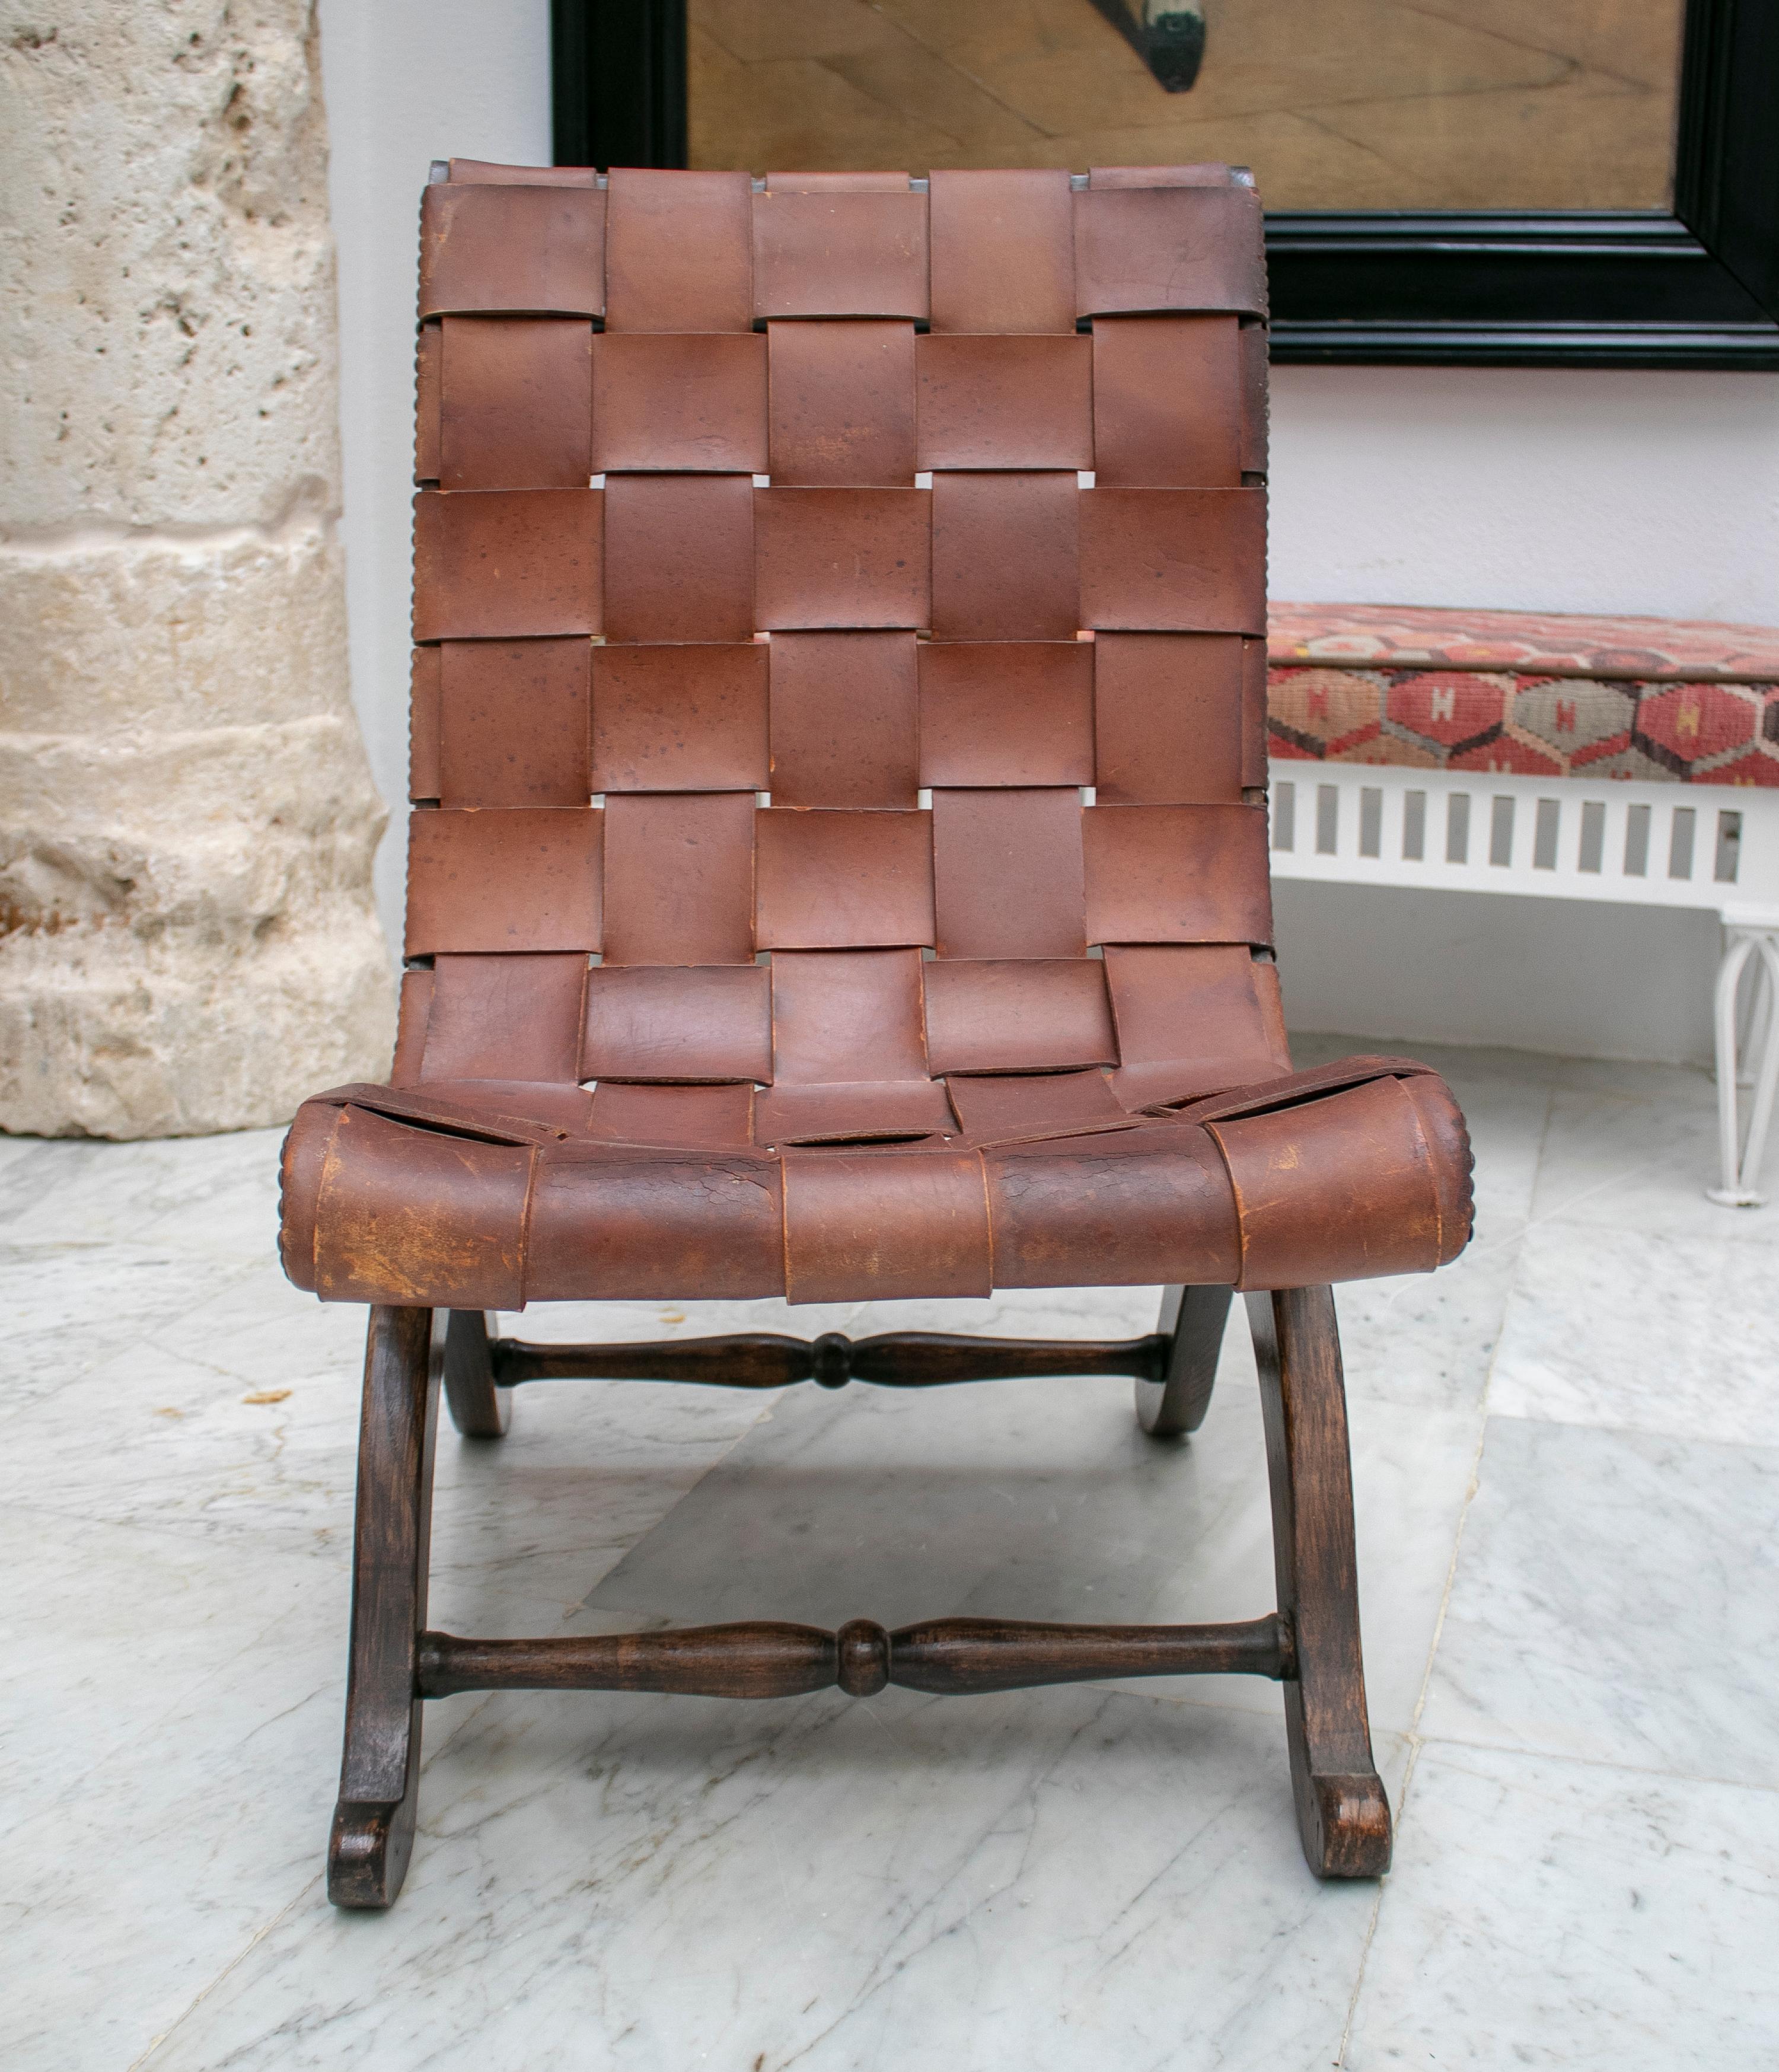 1970s Spanish wood and laced leather chair.